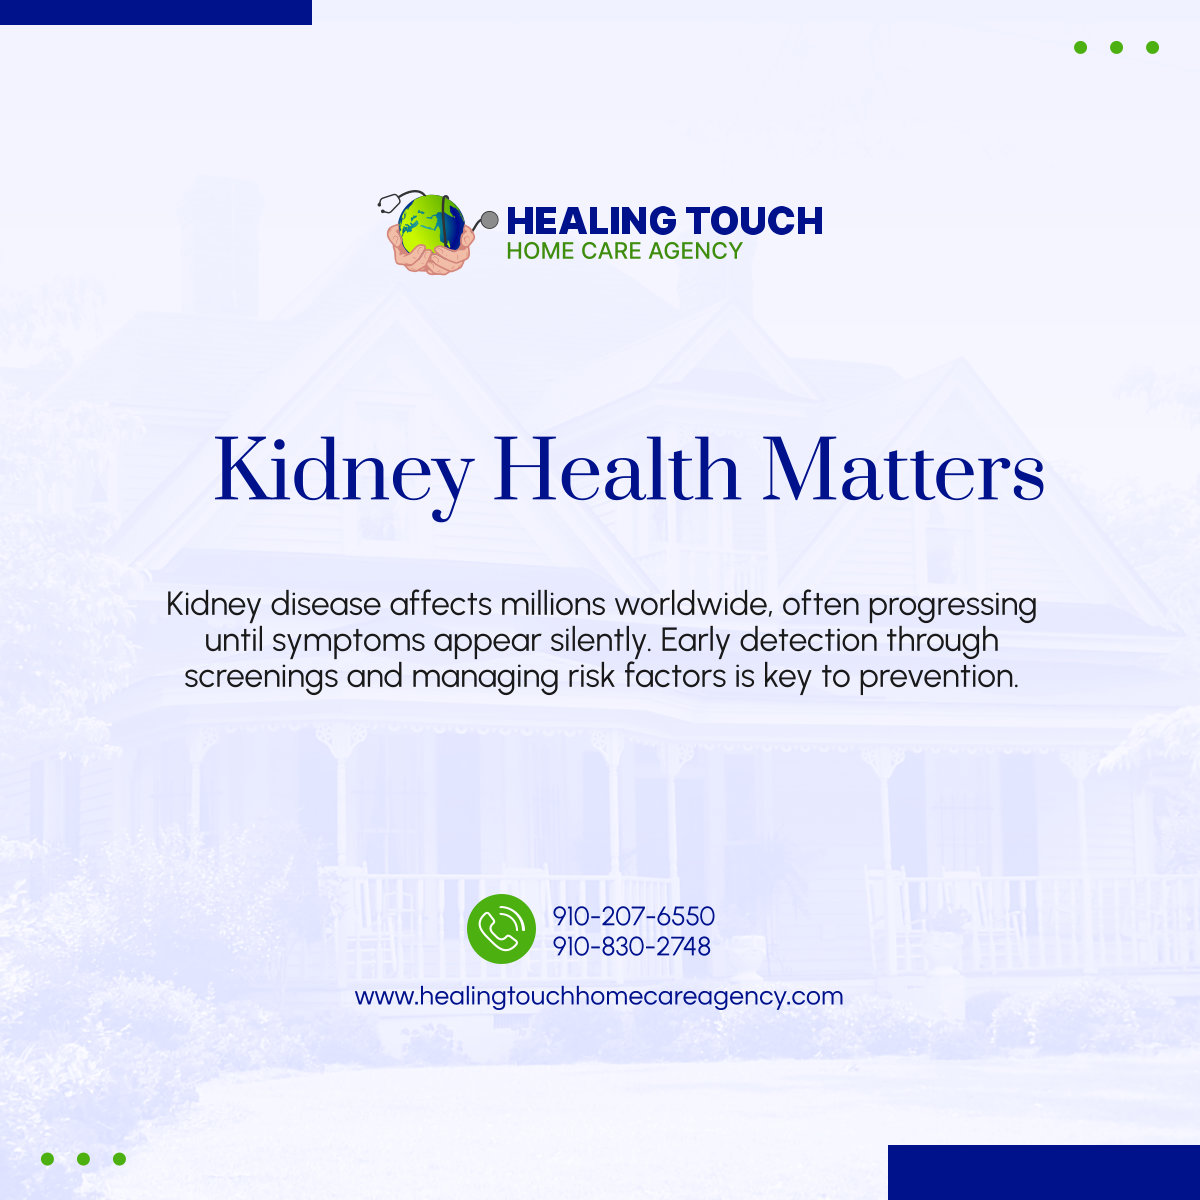 Your kidneys play a crucial role in your health. Learn more about kidney disease and how to protect your kidney health for a longer, healthier life.

#KidneyHealth #JacksonvilleNC #HomeHealthCare #HealthFacts #HealingTouchHomeCareAgency